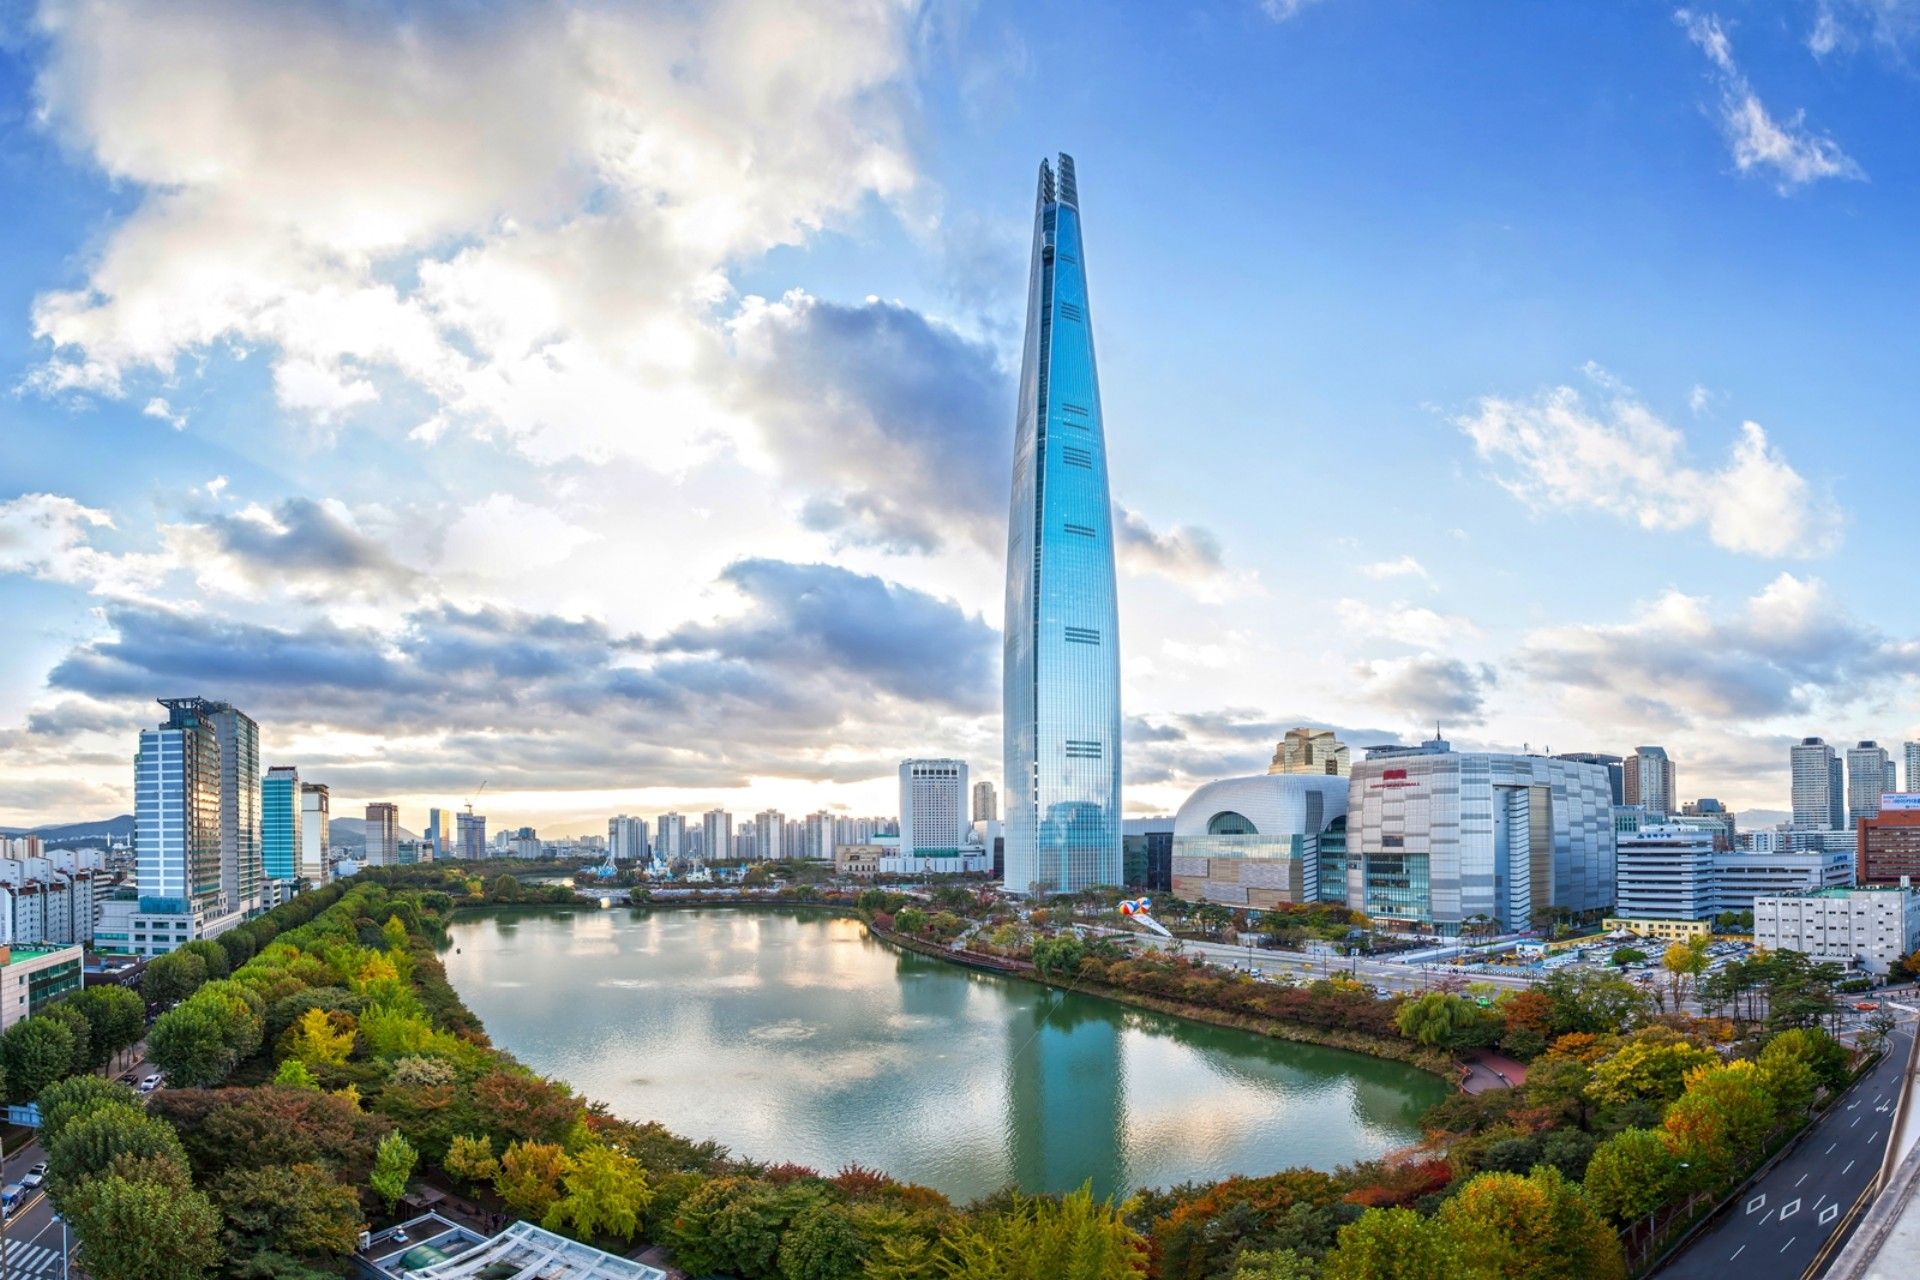 Lotte World Tower: the world's fifth tallest skyscraper is in Seoul